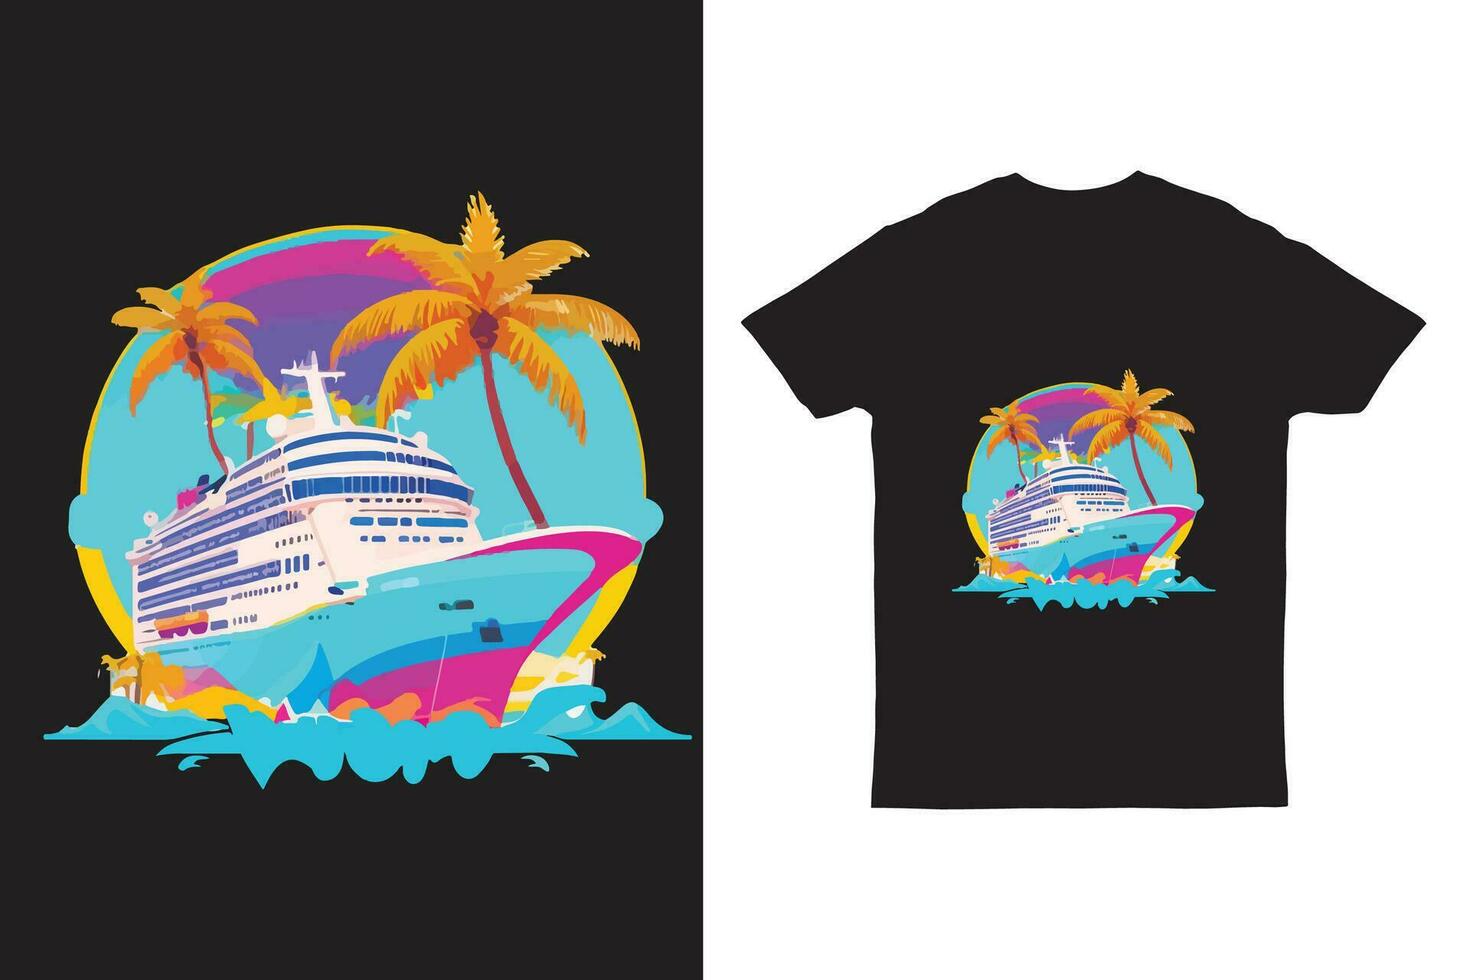 graphic t-shirt illustration of Palm Tree, Cruise ship  vibrant colors. vector art.